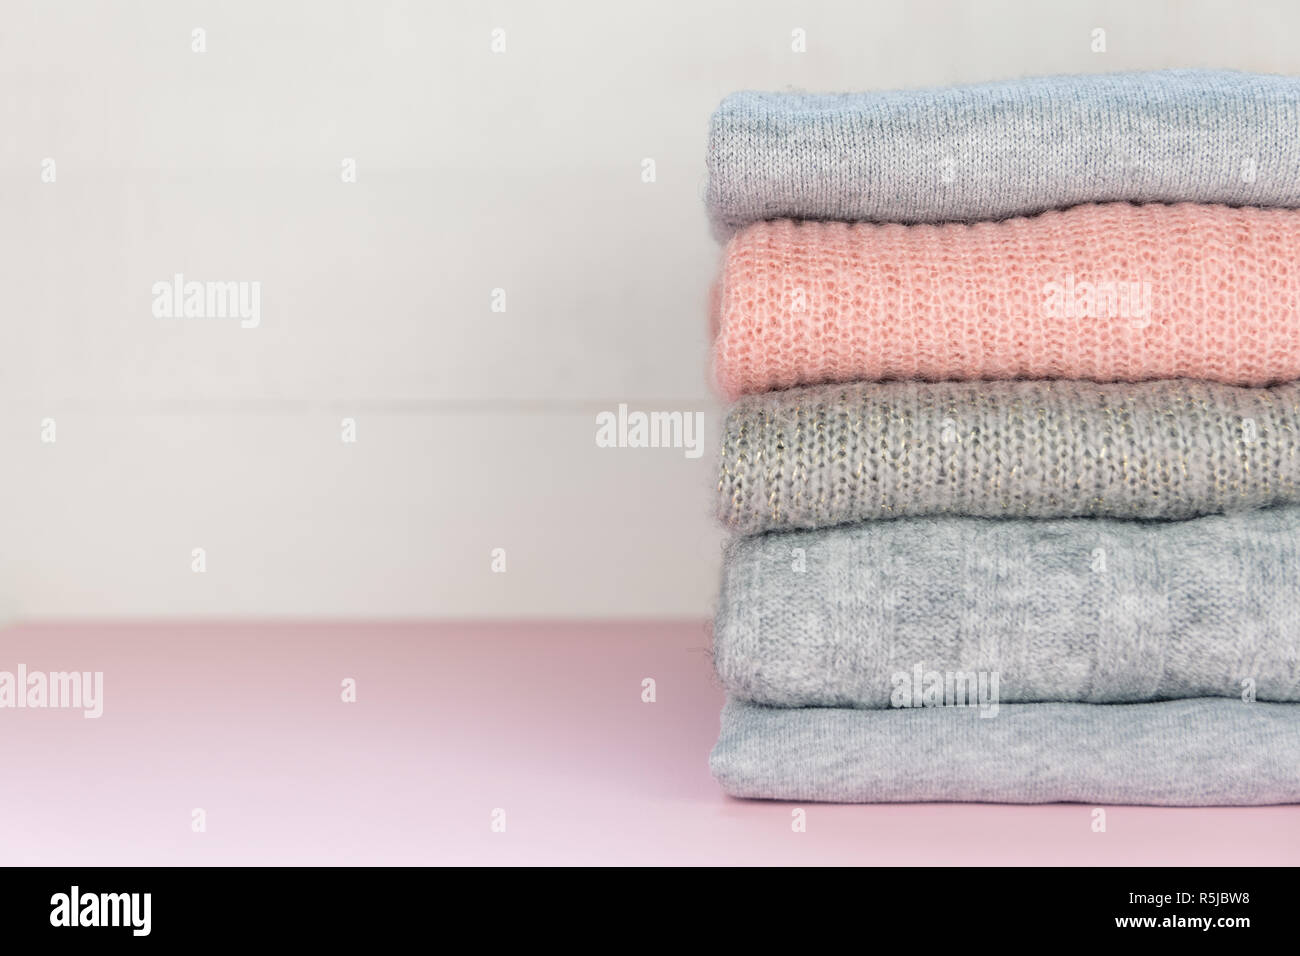 Four grey and one pink folded knitted jumpers laying on pastel pink surface. Stock Photo